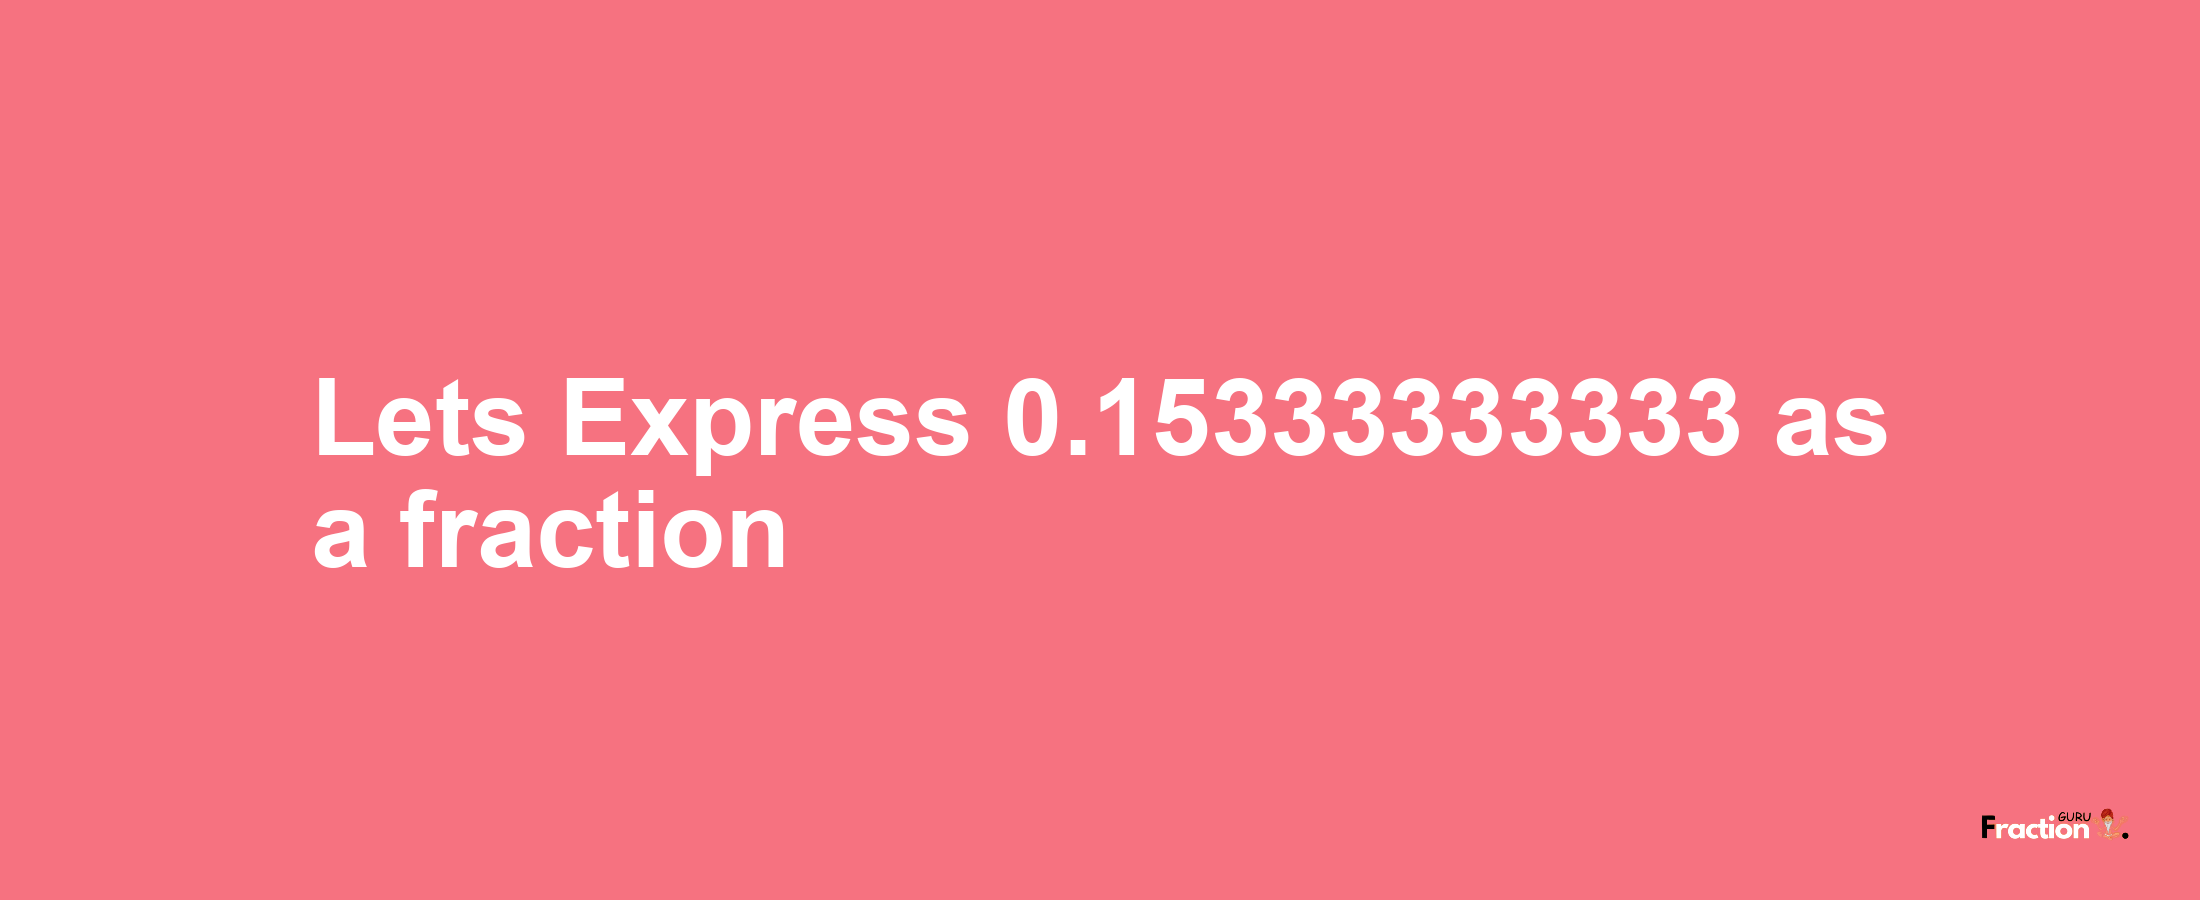 Lets Express 0.15333333333 as afraction